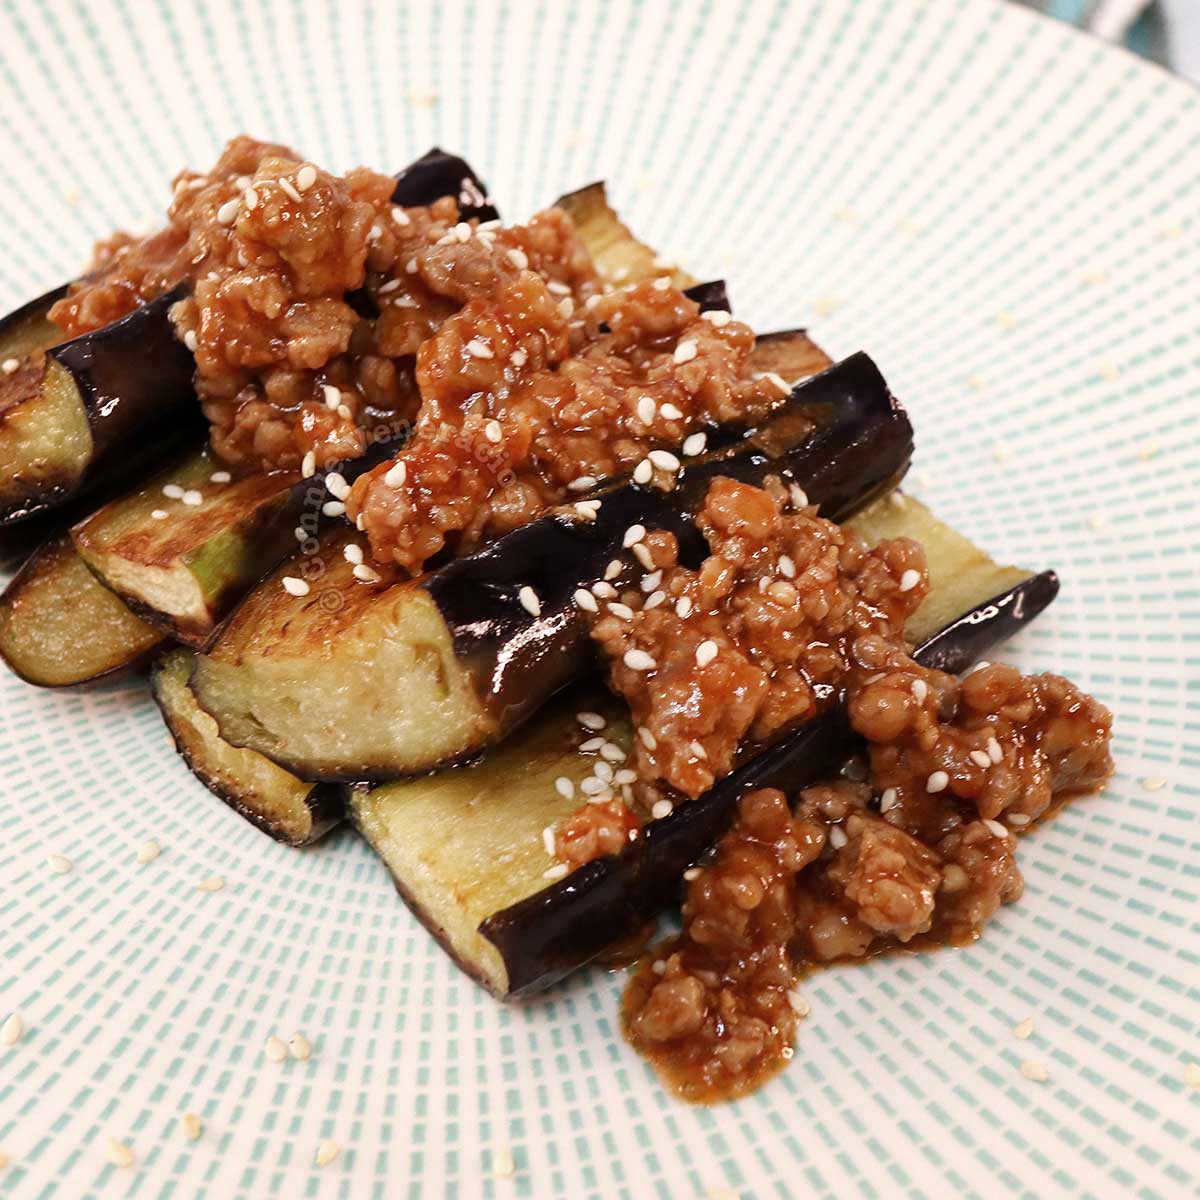 Chinese-style pan-fried eggplants with minced pork